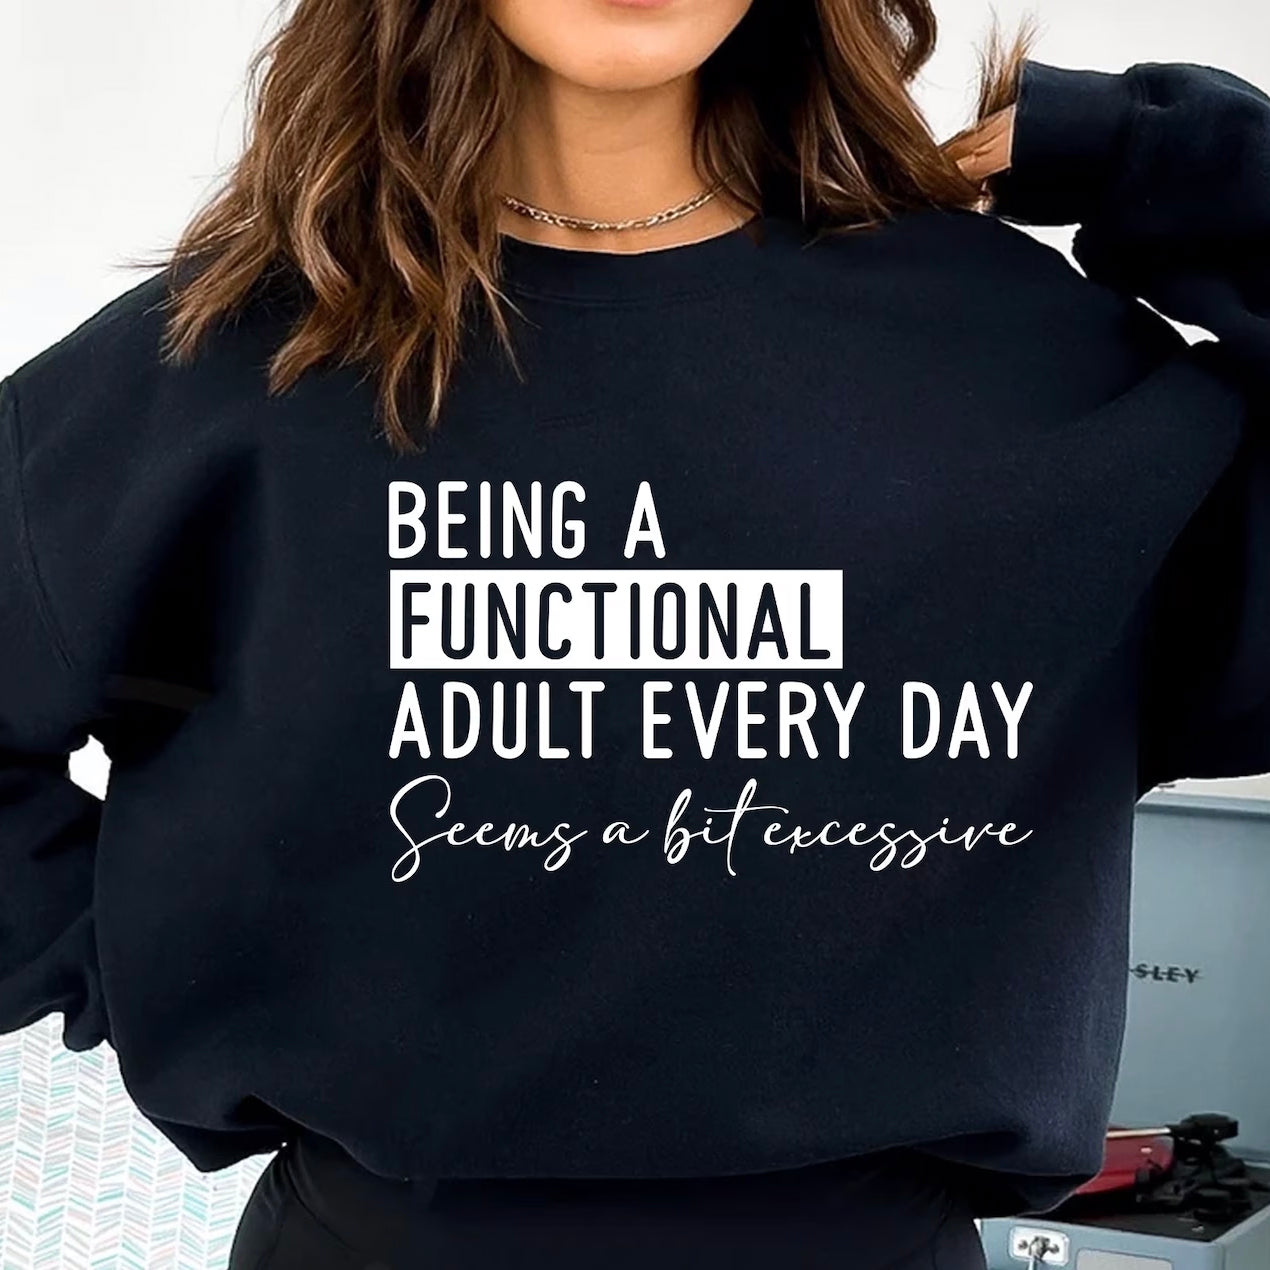 Being a functional adult